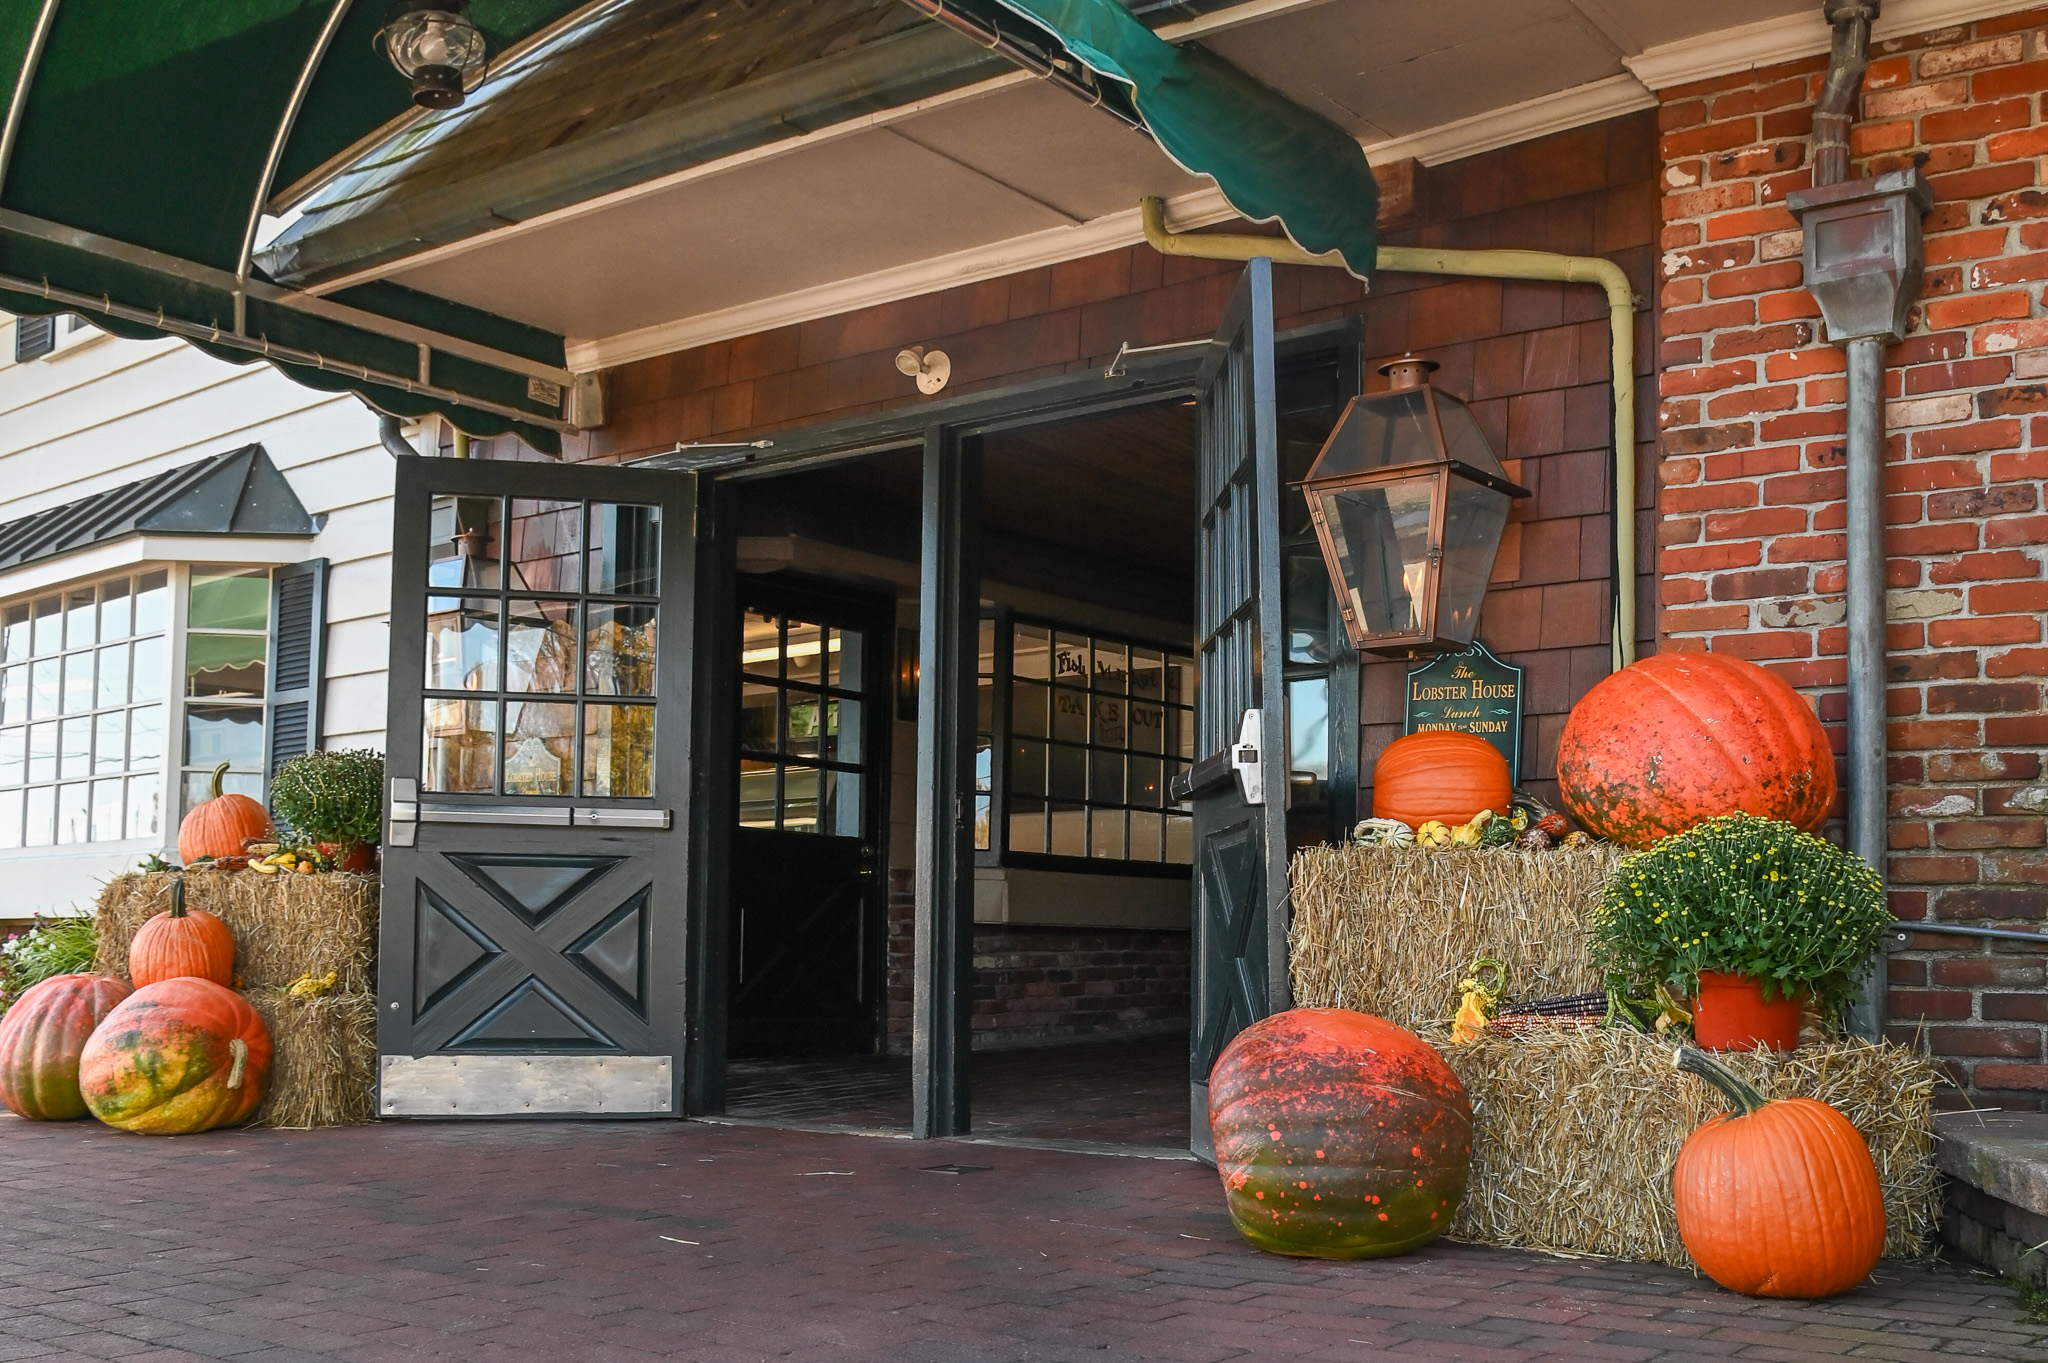 Pumpkins at The Lobster House